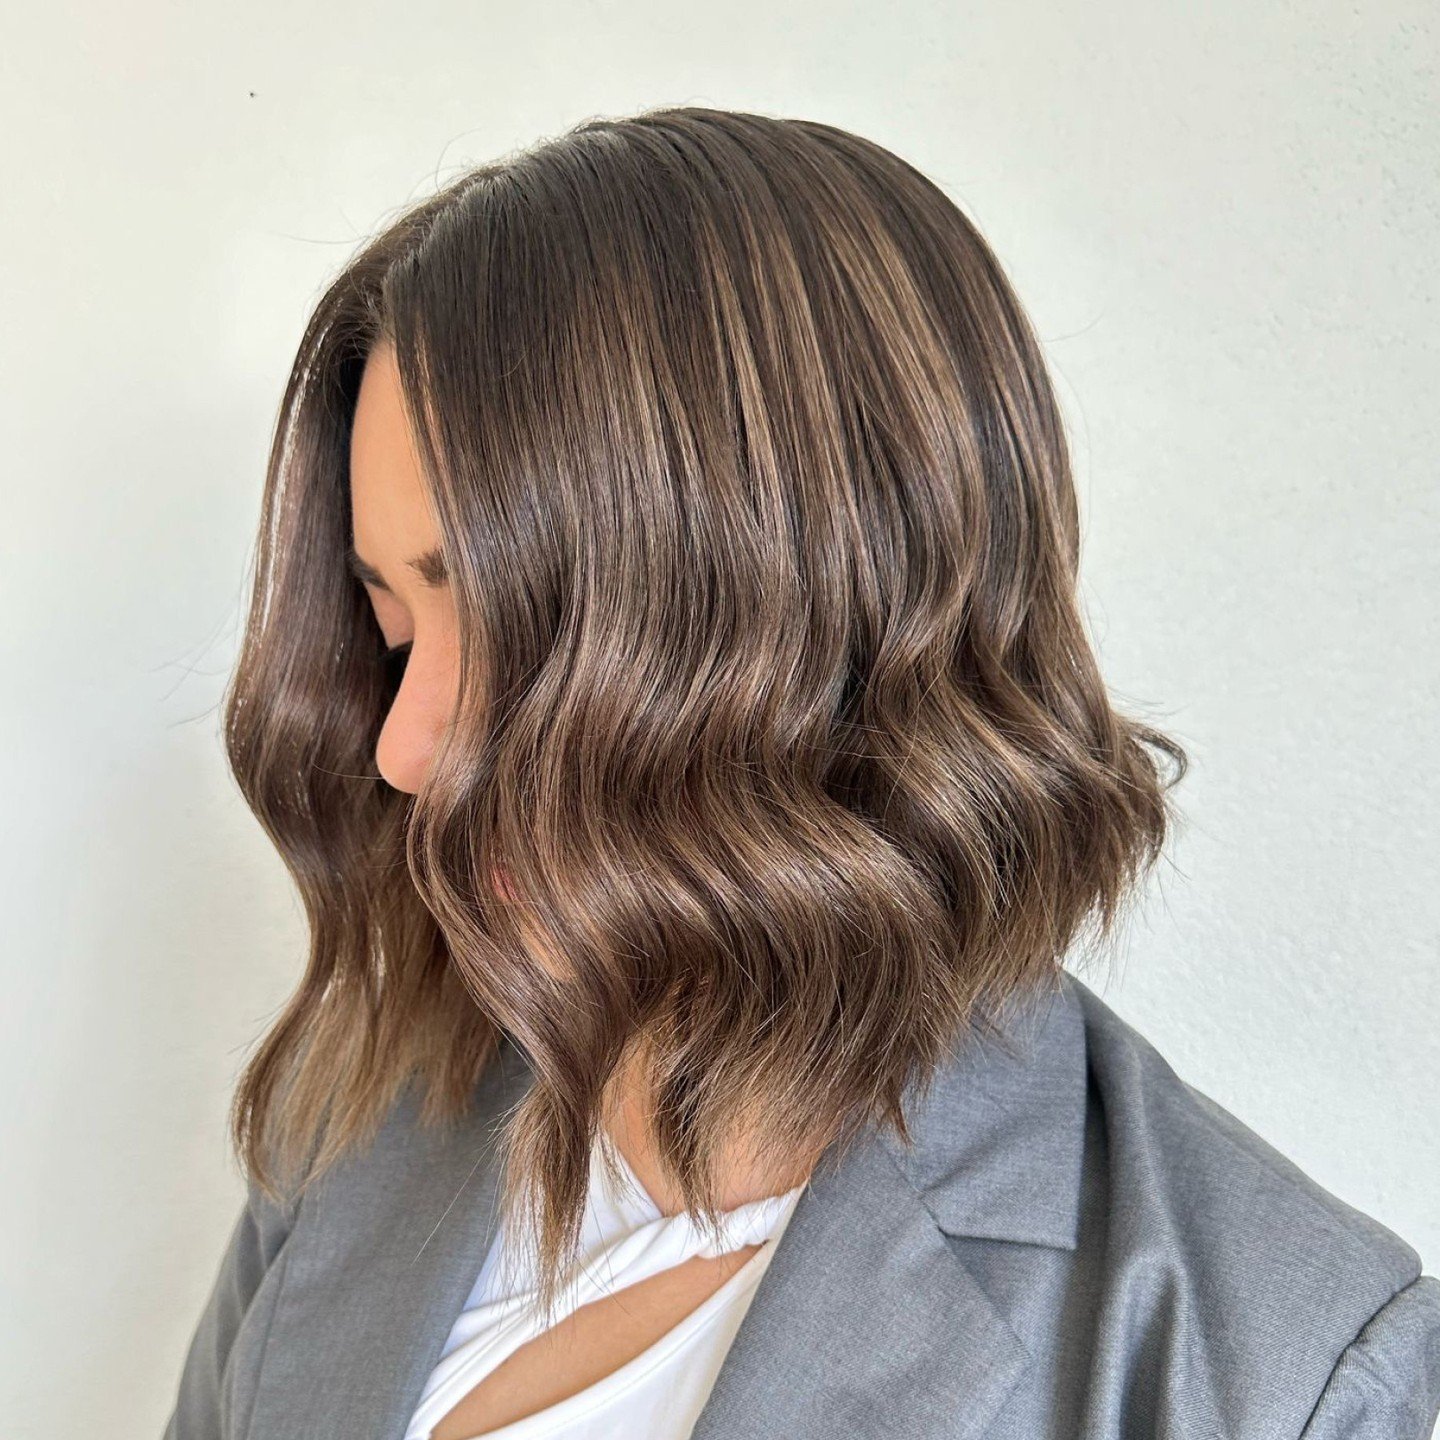 Lianah, left our salon beaming and sparkling! 

We're proud to offer a range of premium hair treatments that are designed to nourish, protect, and enhance the natural beauty of your locks. 

For Lianah, we recommended our SHINEFINITY treatment, which